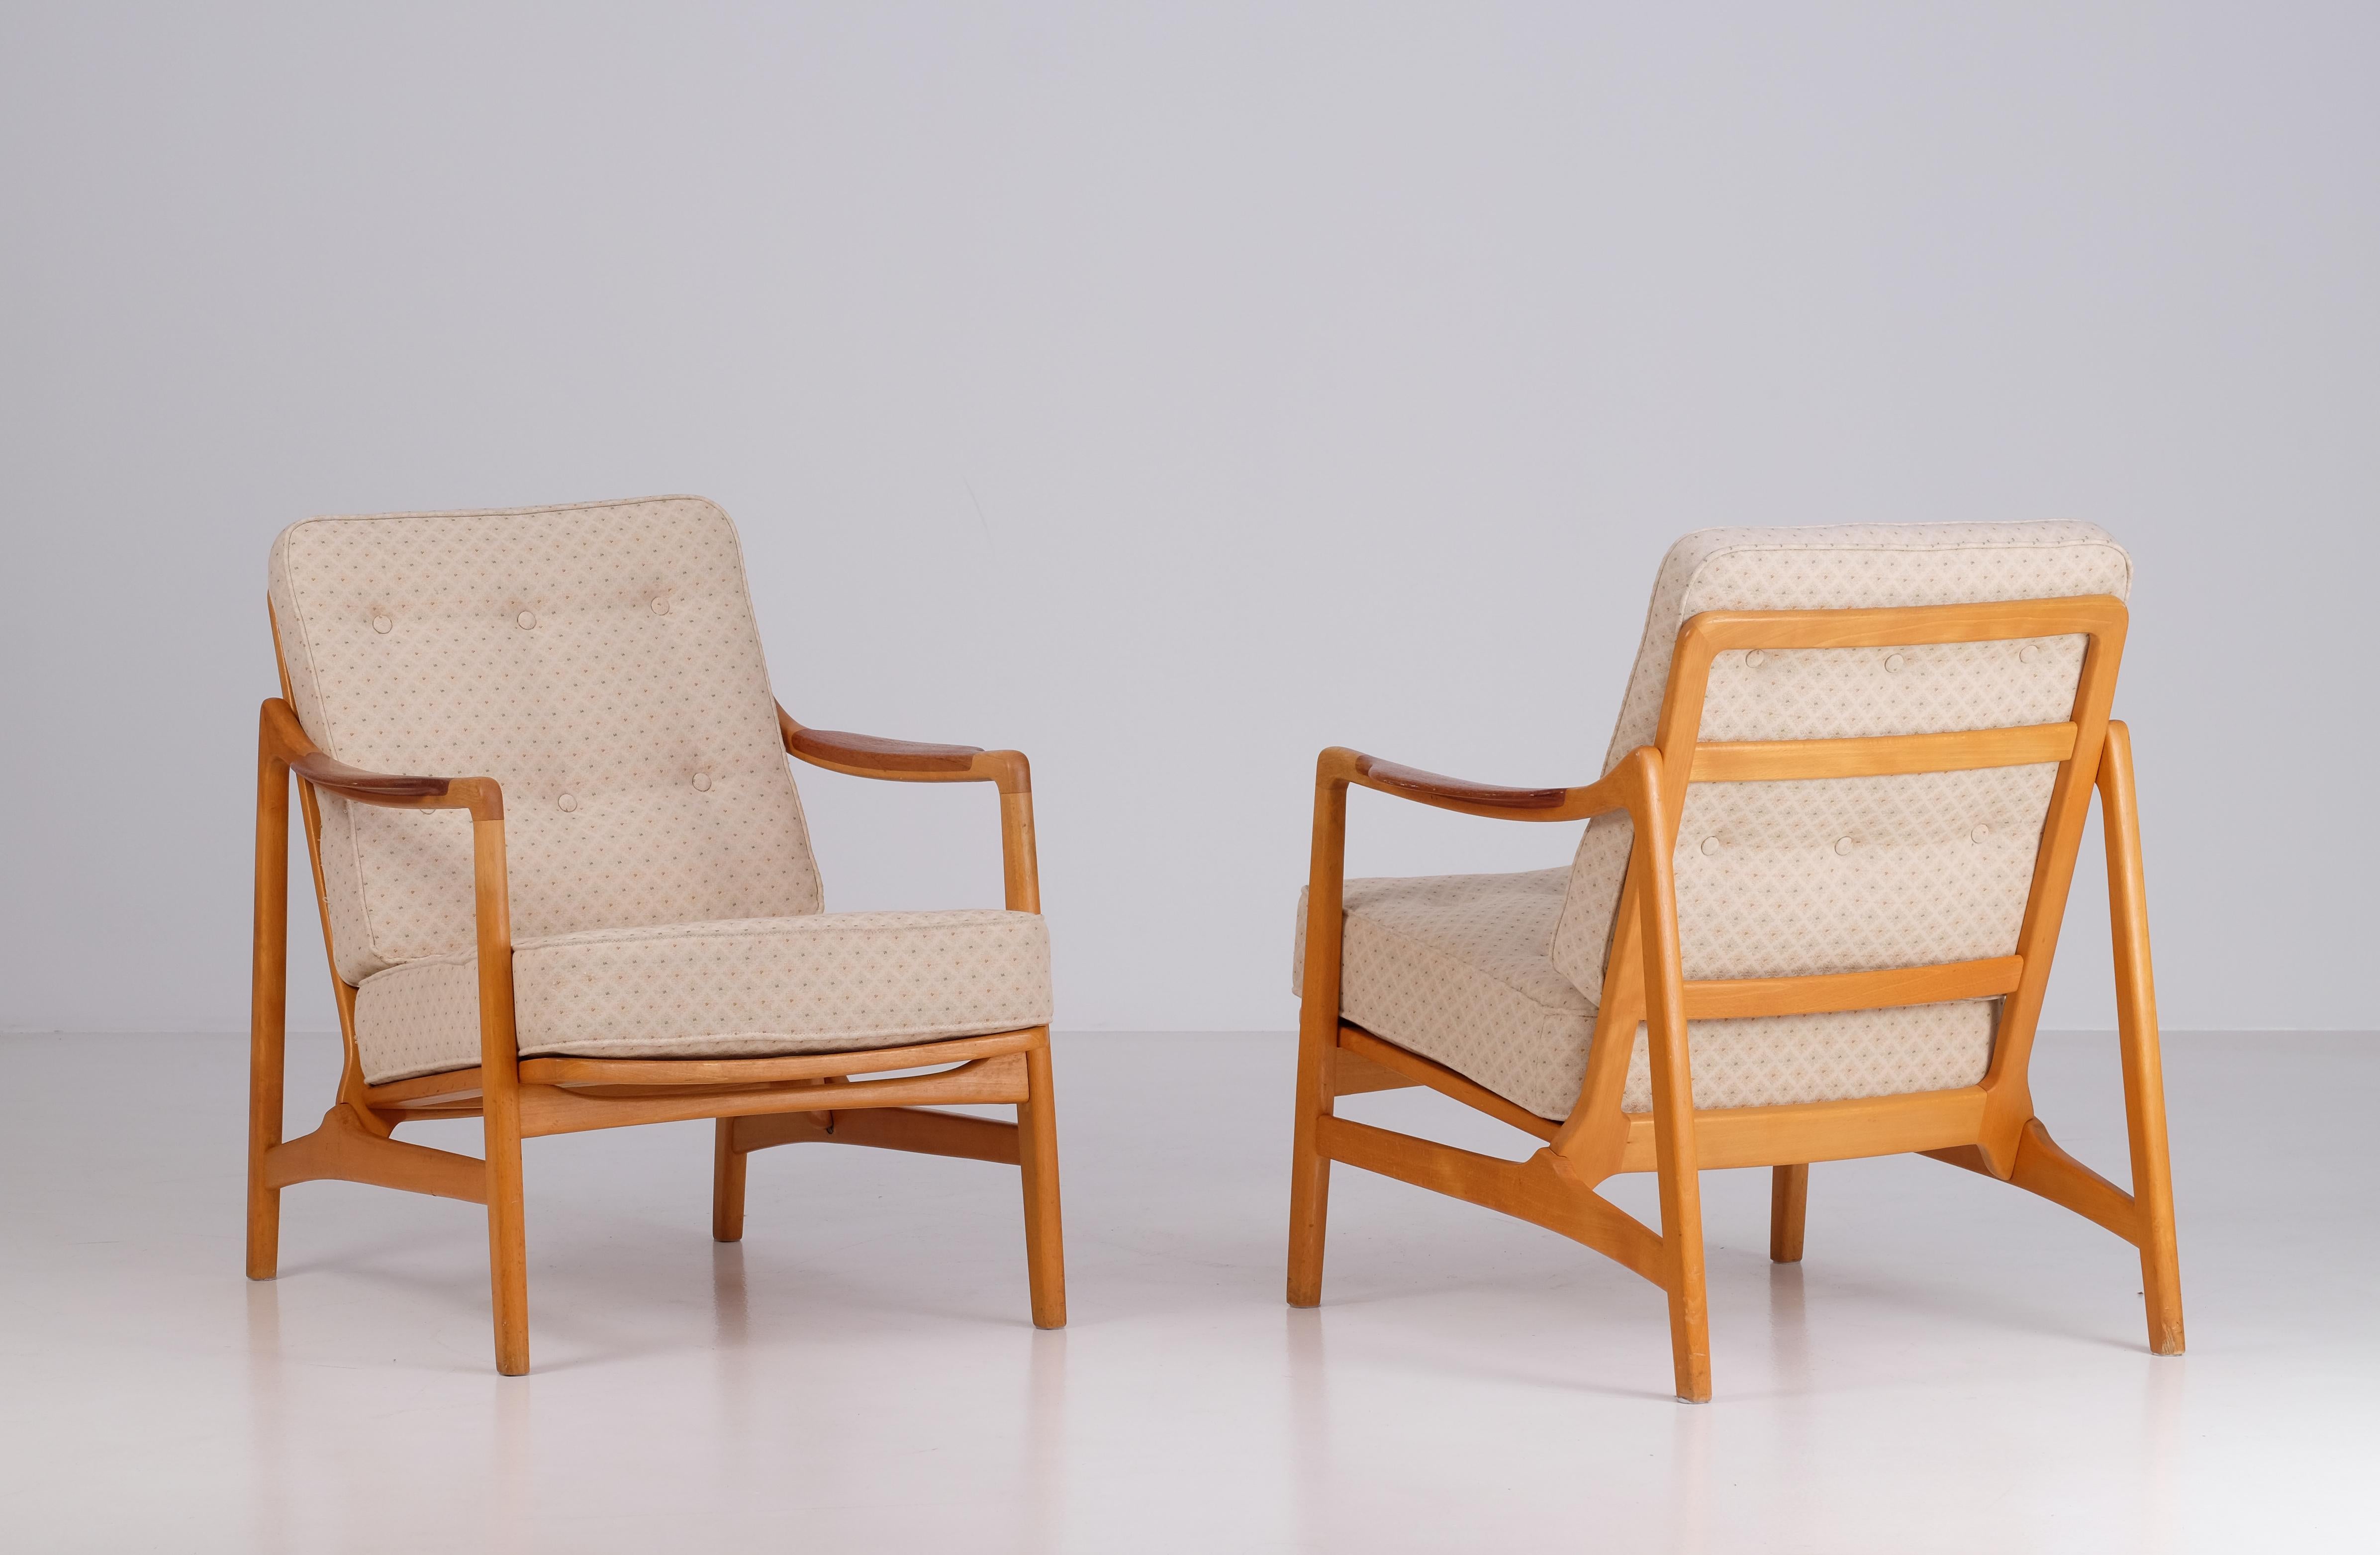 Swedish Pair of Tove and Edvard Kindt-Larsen Lounge Chairs, 1960s For Sale